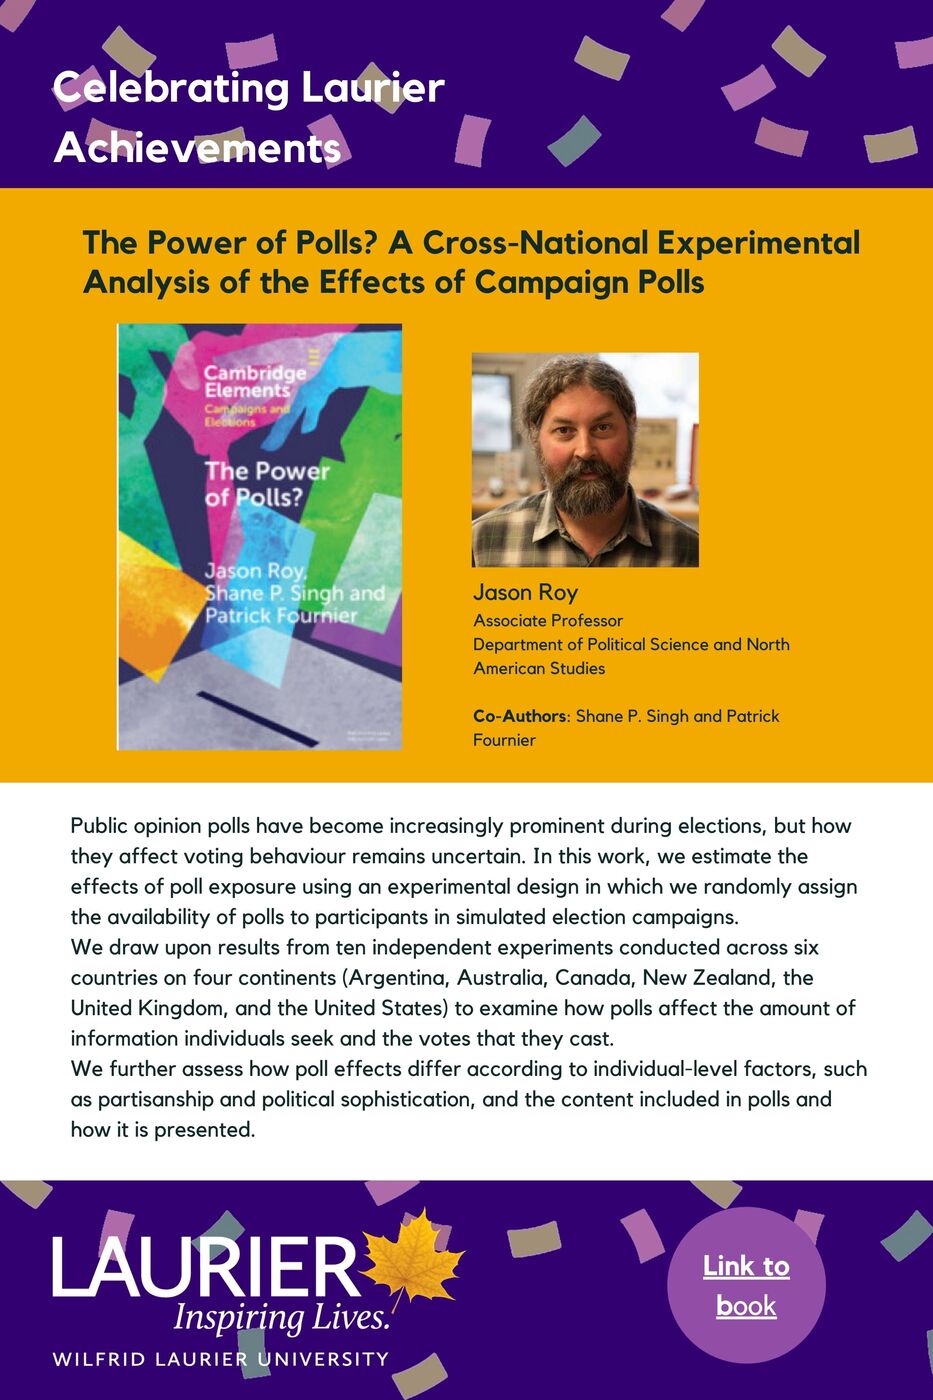 The Power of Polls? A Cross-National Experimental Analysis of the Effects of Campaign Polls promotional poster for the Celebrating Laurier Achievements Program.